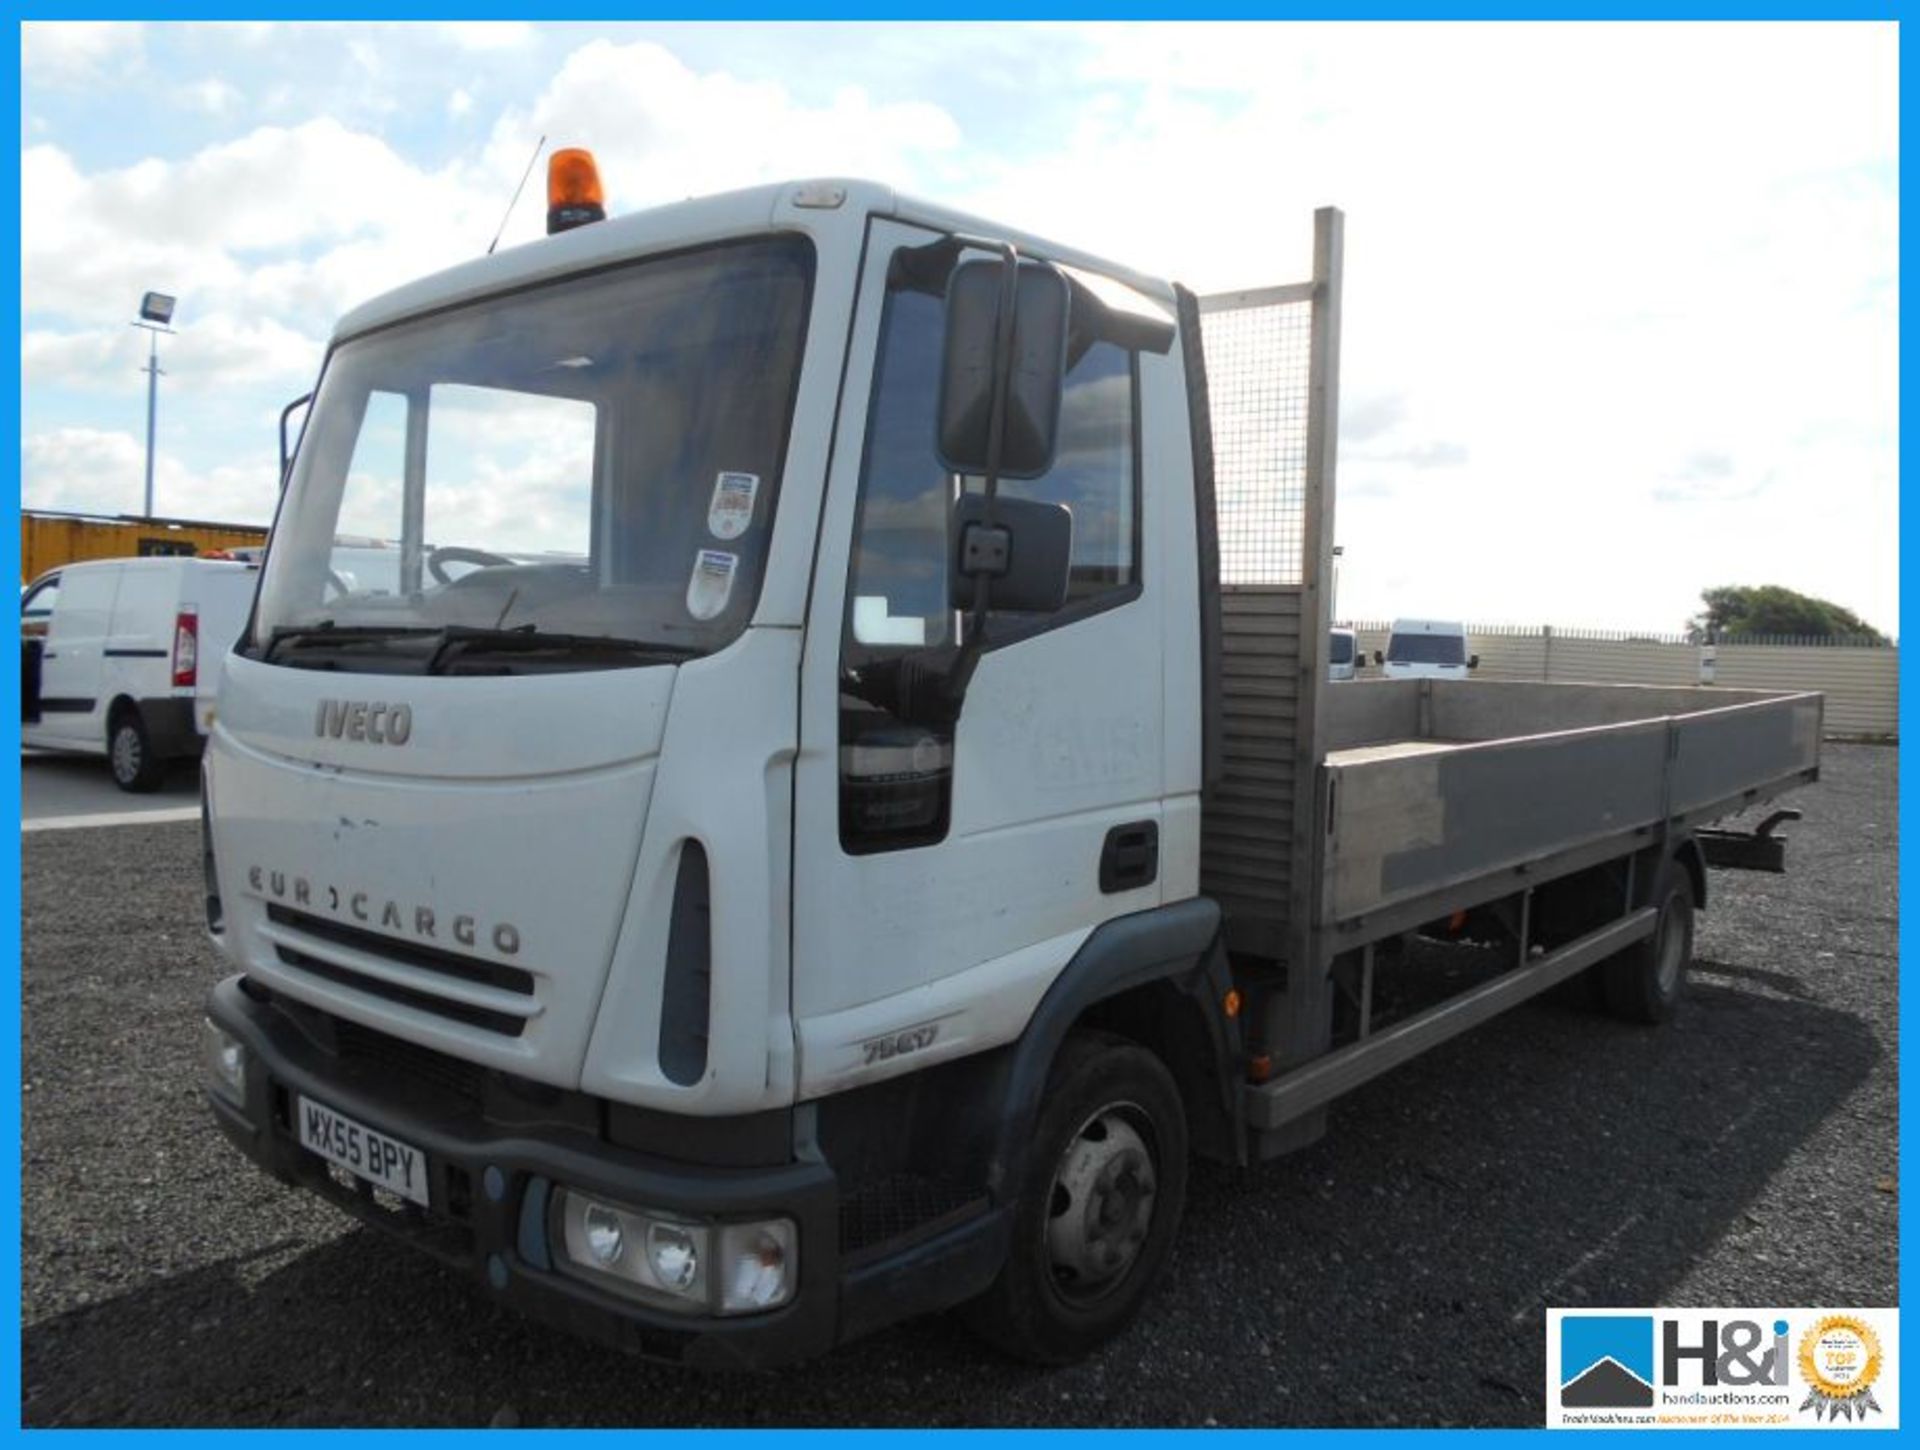 2005 '55' REG. IVECO FORD EURO CARGO 75E17. 20ft ALLOY DROPSIDE BODY. 566,500km. 2 OWNERS. MANUAL - Image 2 of 12